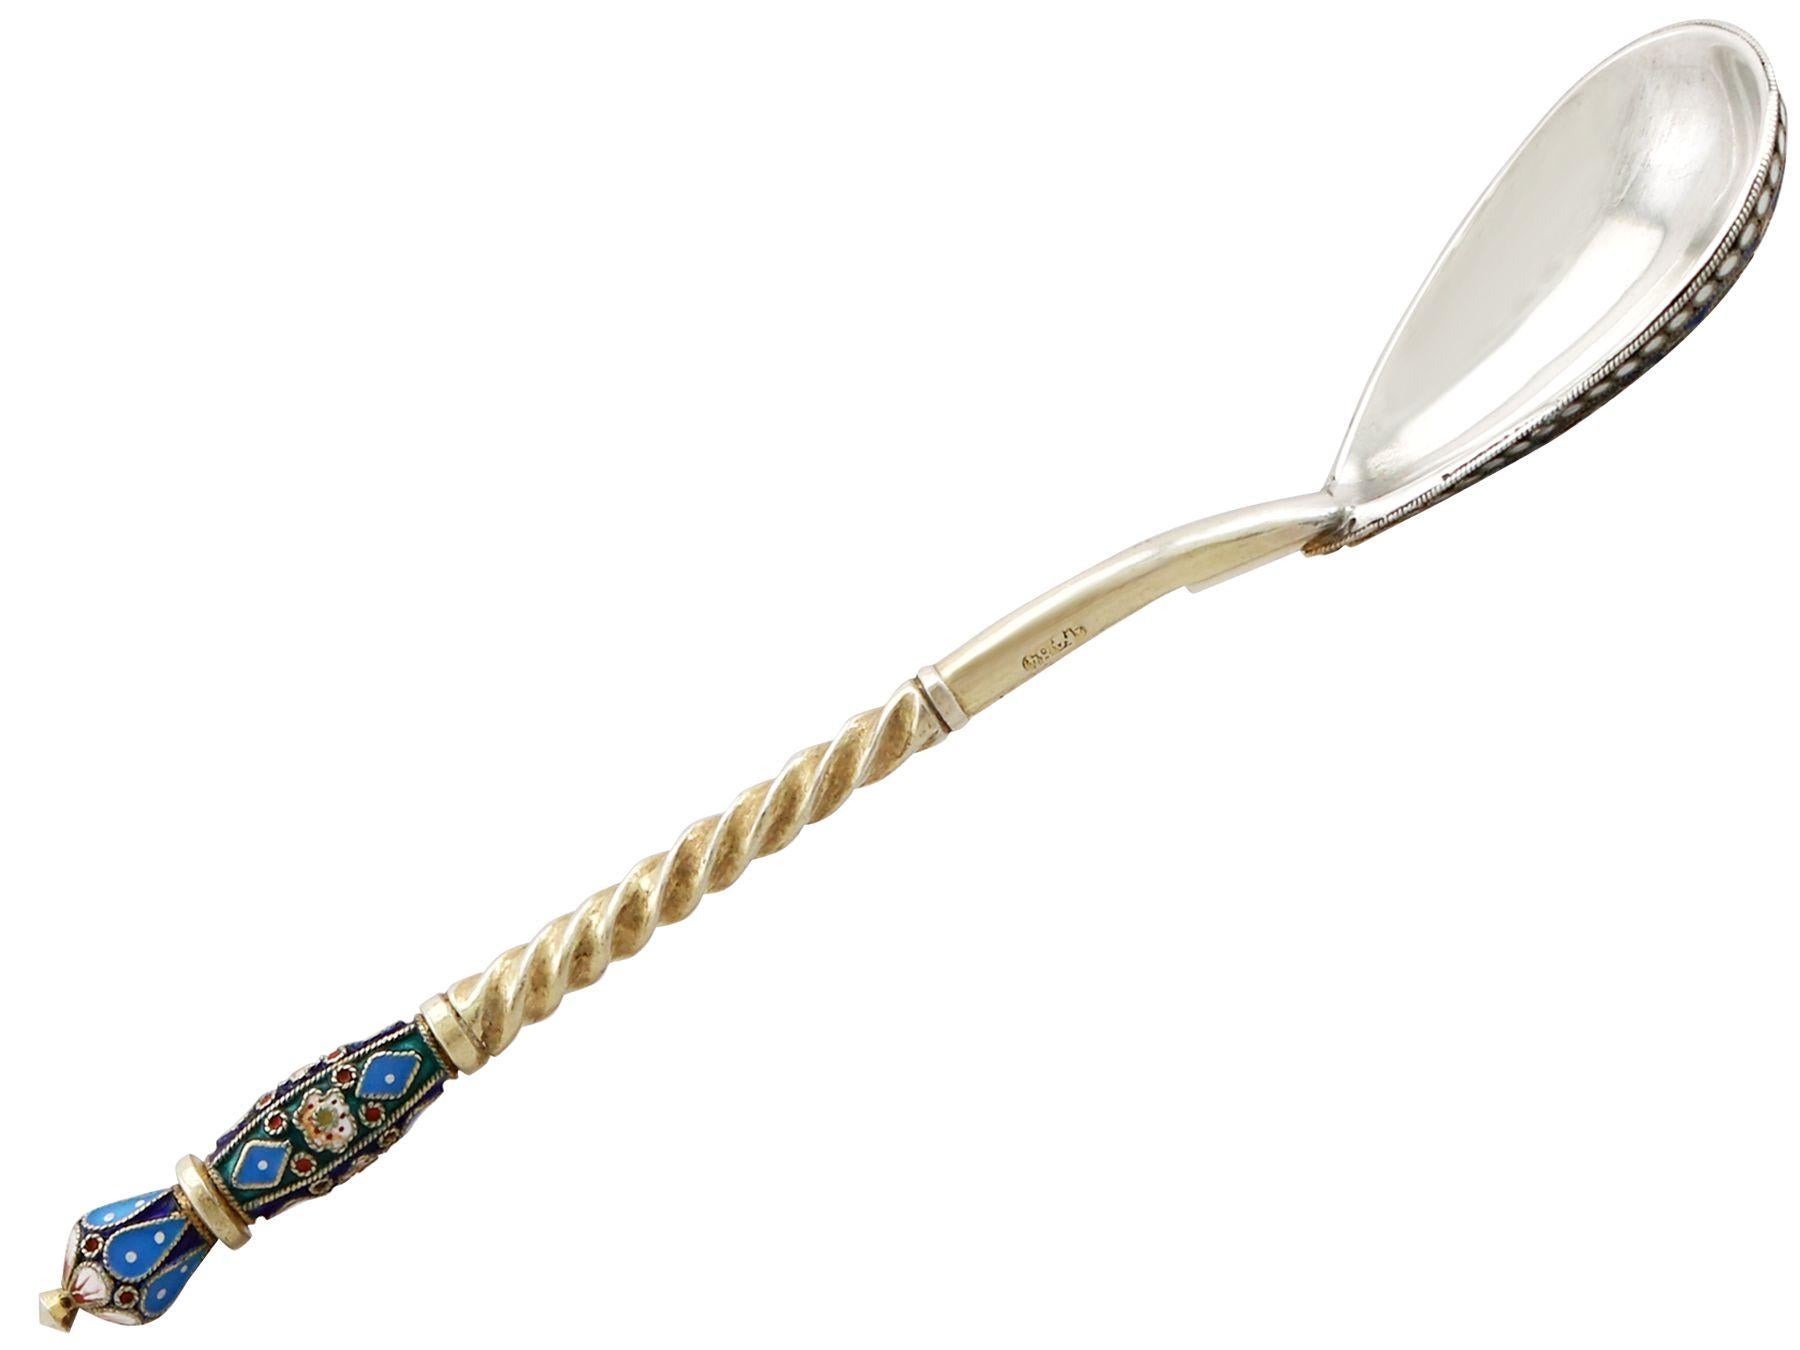 An exceptional, fine and impressive antique Russian silver gilt and polychrome cloisonné enamel spoon; an addition to our Russian silverware collection.

This exceptional antique Russian silver gilt and polychrome cloisonné enamel spoon has an